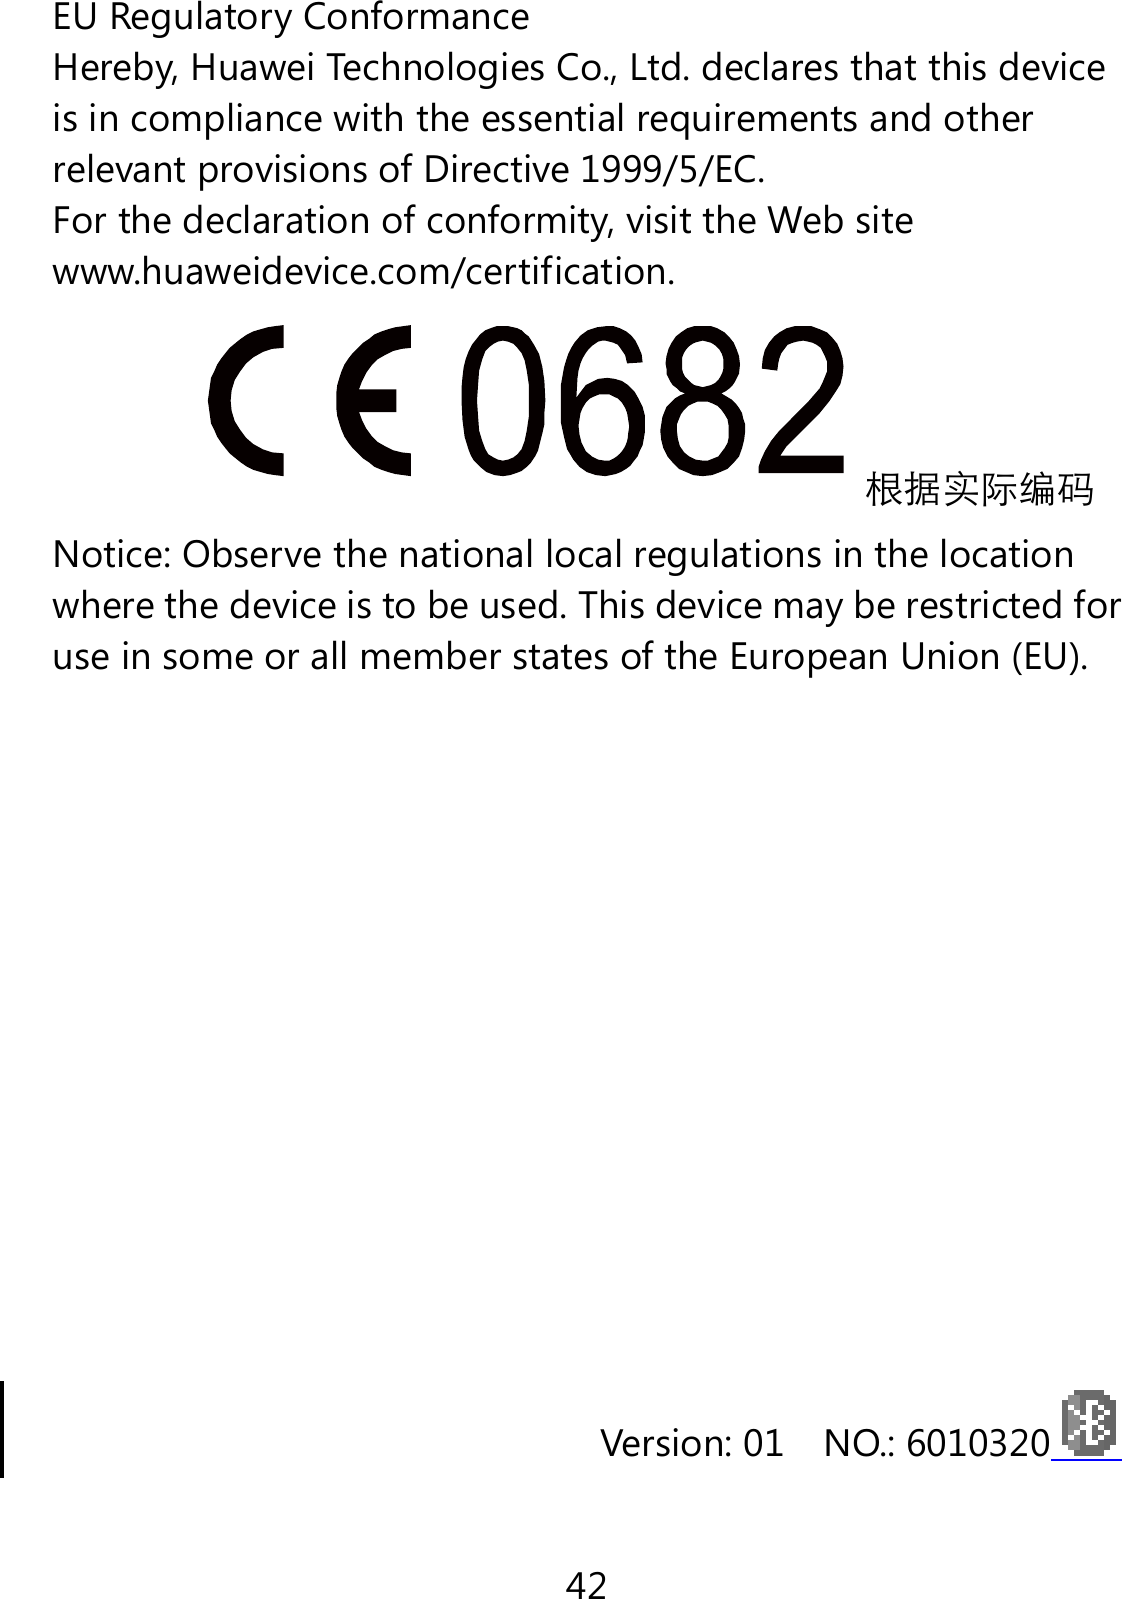 42 EU Regulatory Conformance Hereby, Huawei Technologies Co., Ltd. declares that this device is in compliance with the essential requirements and other relevant provisions of Directive 1999/5/EC. For the declaration of conformity, visit the Web site www.huaweidevice.com/certification. 根据实际编码 Notice: Observe the national local regulations in the location where the device is to be used. This device may be restricted for use in some or all member states of the European Union (EU).            Version: 01    NO.: 6010320  